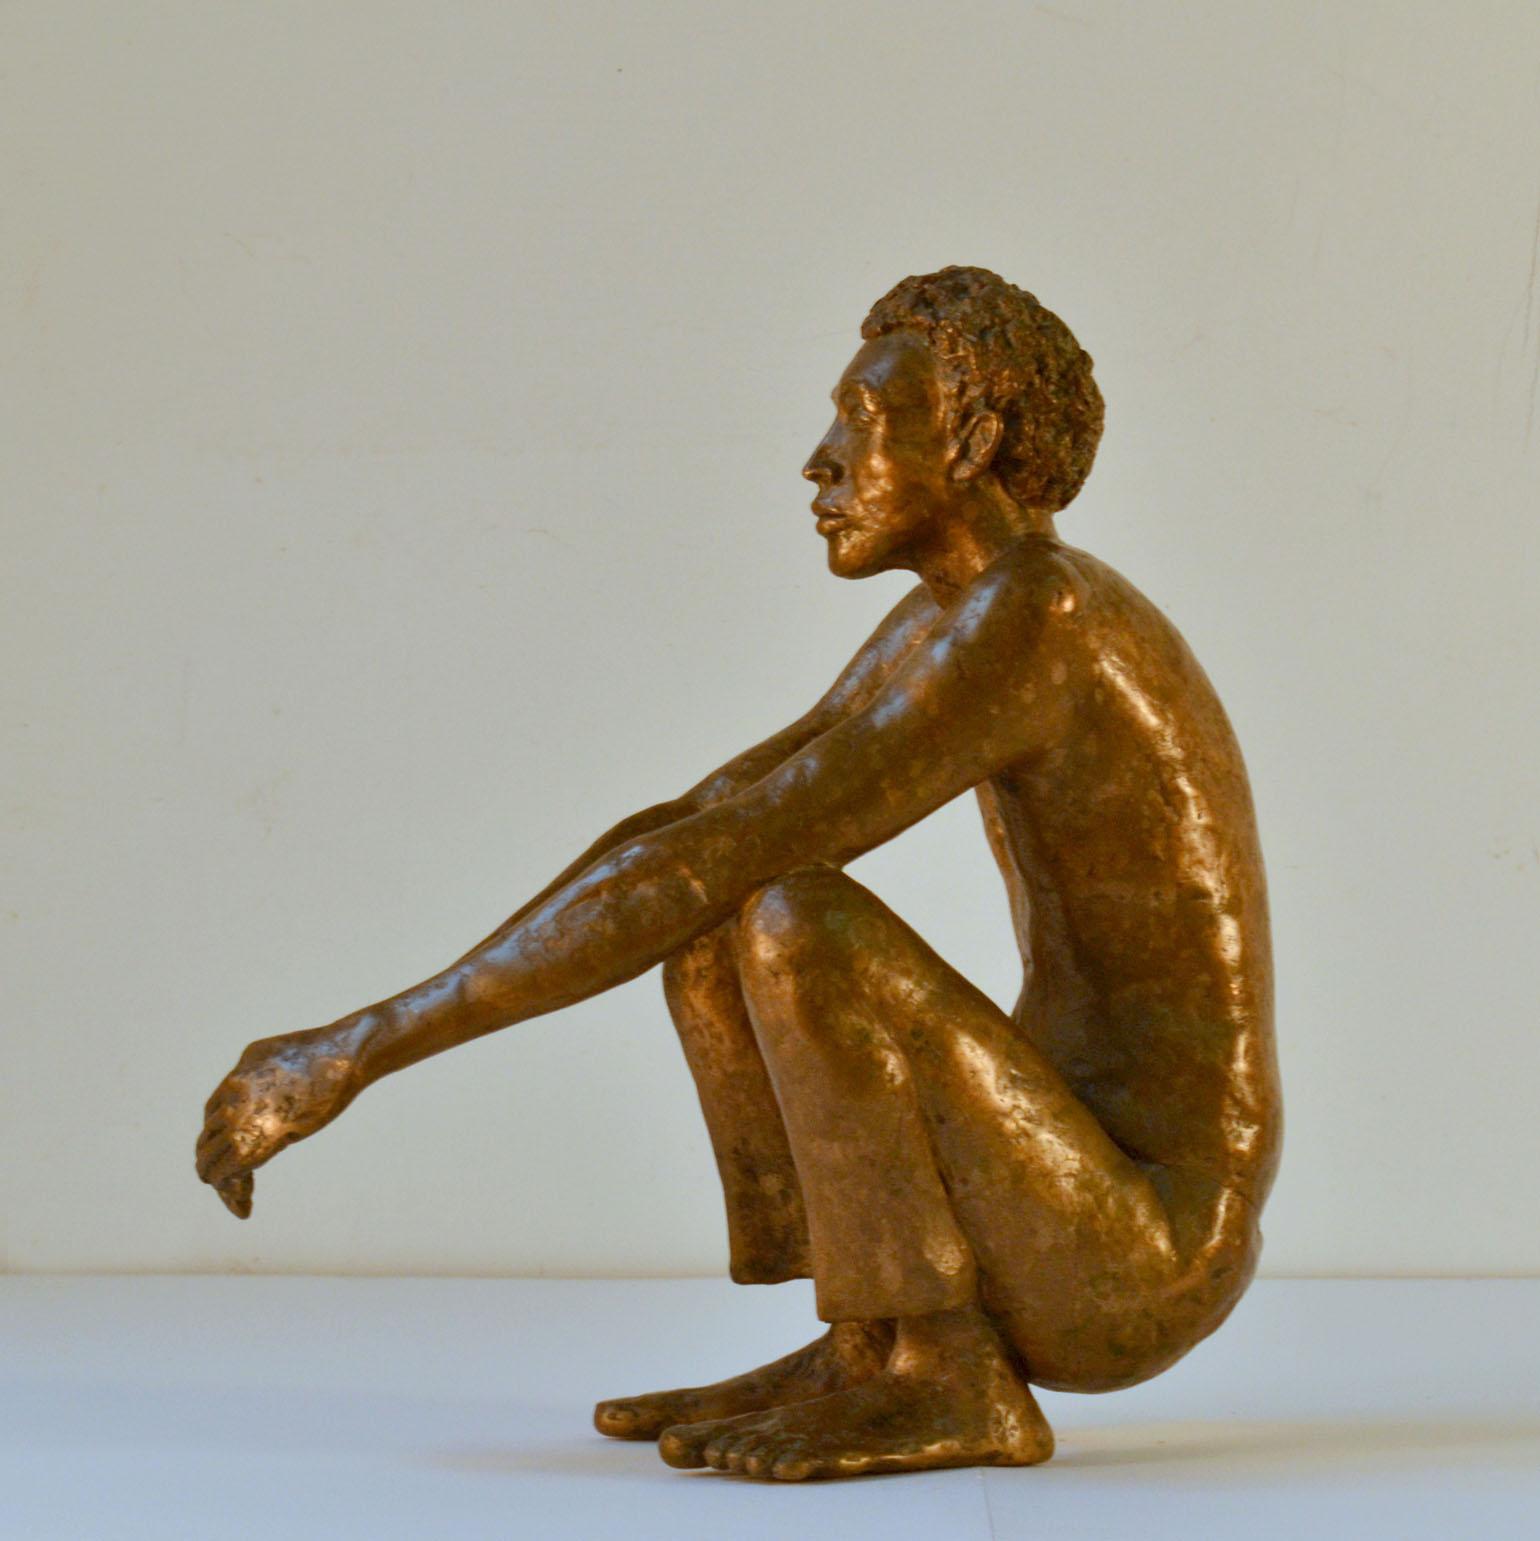 Waiting man, bronze cast sculpture of a seated man by Dutch Artist Lies Gronheid, Amsterdam, 1986.
It is of a man seated in the action of anticipation whether staying or delaying movement in time and space. There are many unanswered questions to